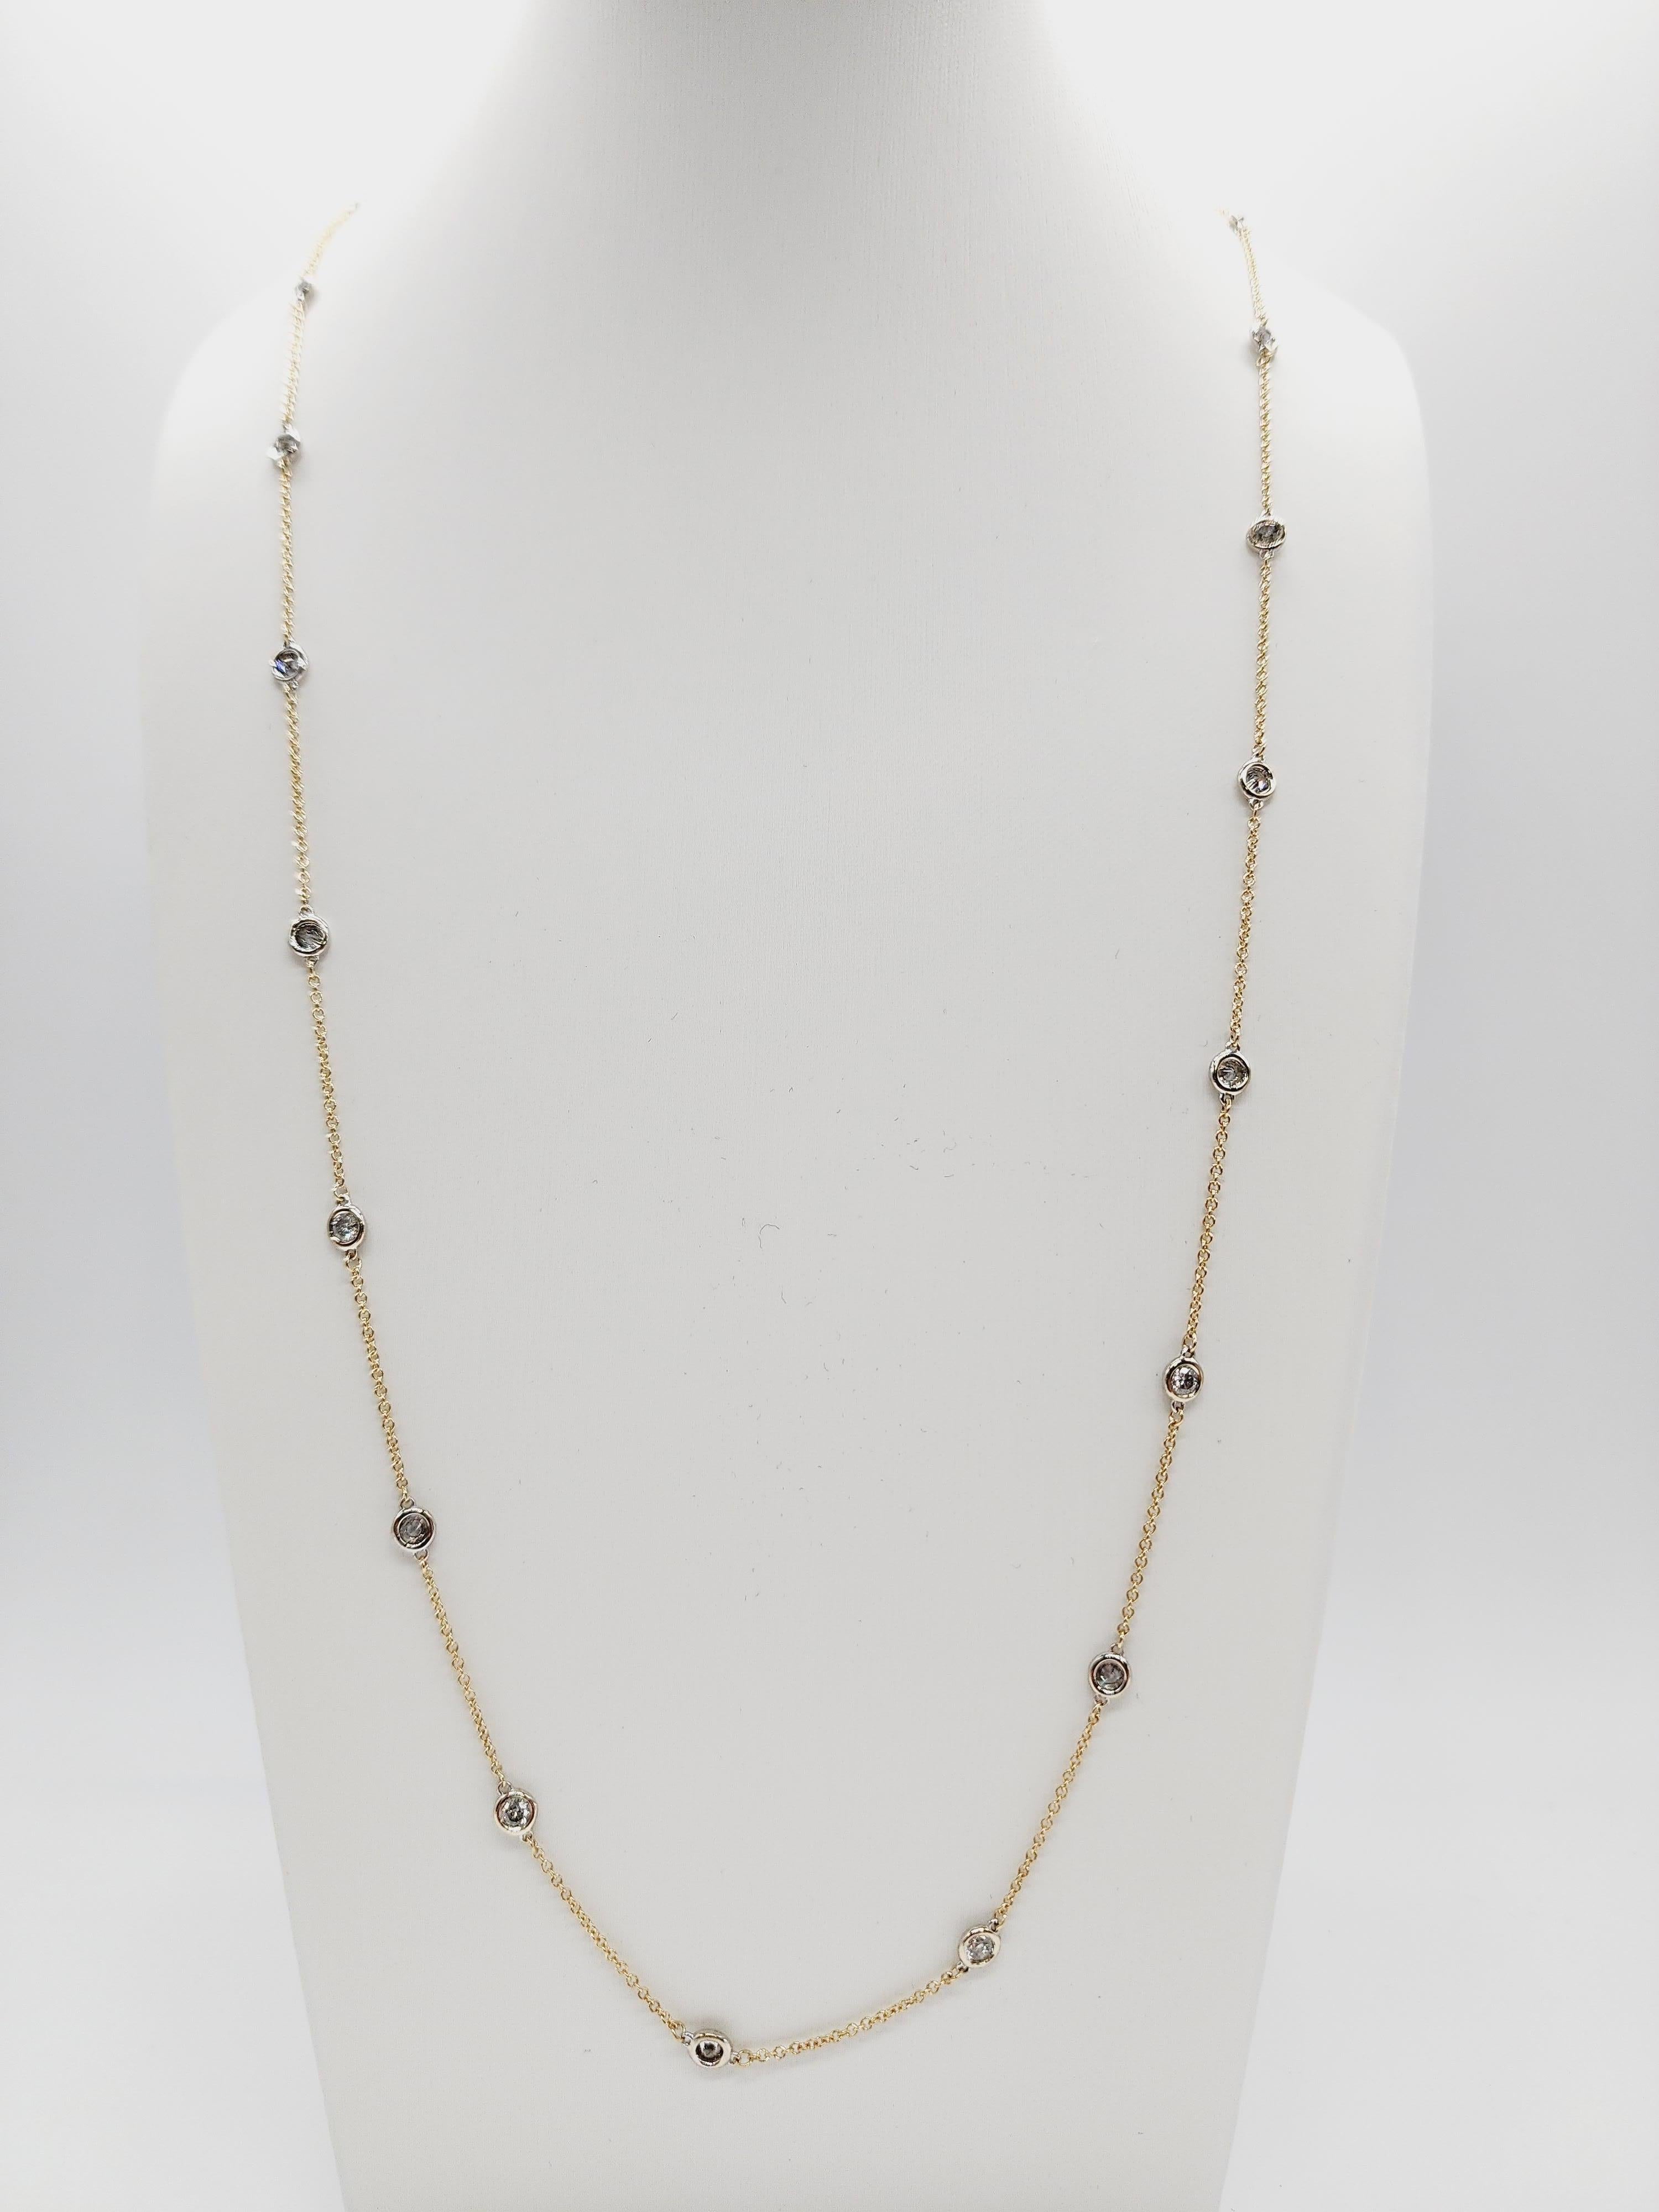 25 Station Diamond by the yard necklace set in Italian made 14K two tone gold. 
total weight is 2.40 carats. Beautiful shiny stones. total length is 30 inch. Average G-I1.